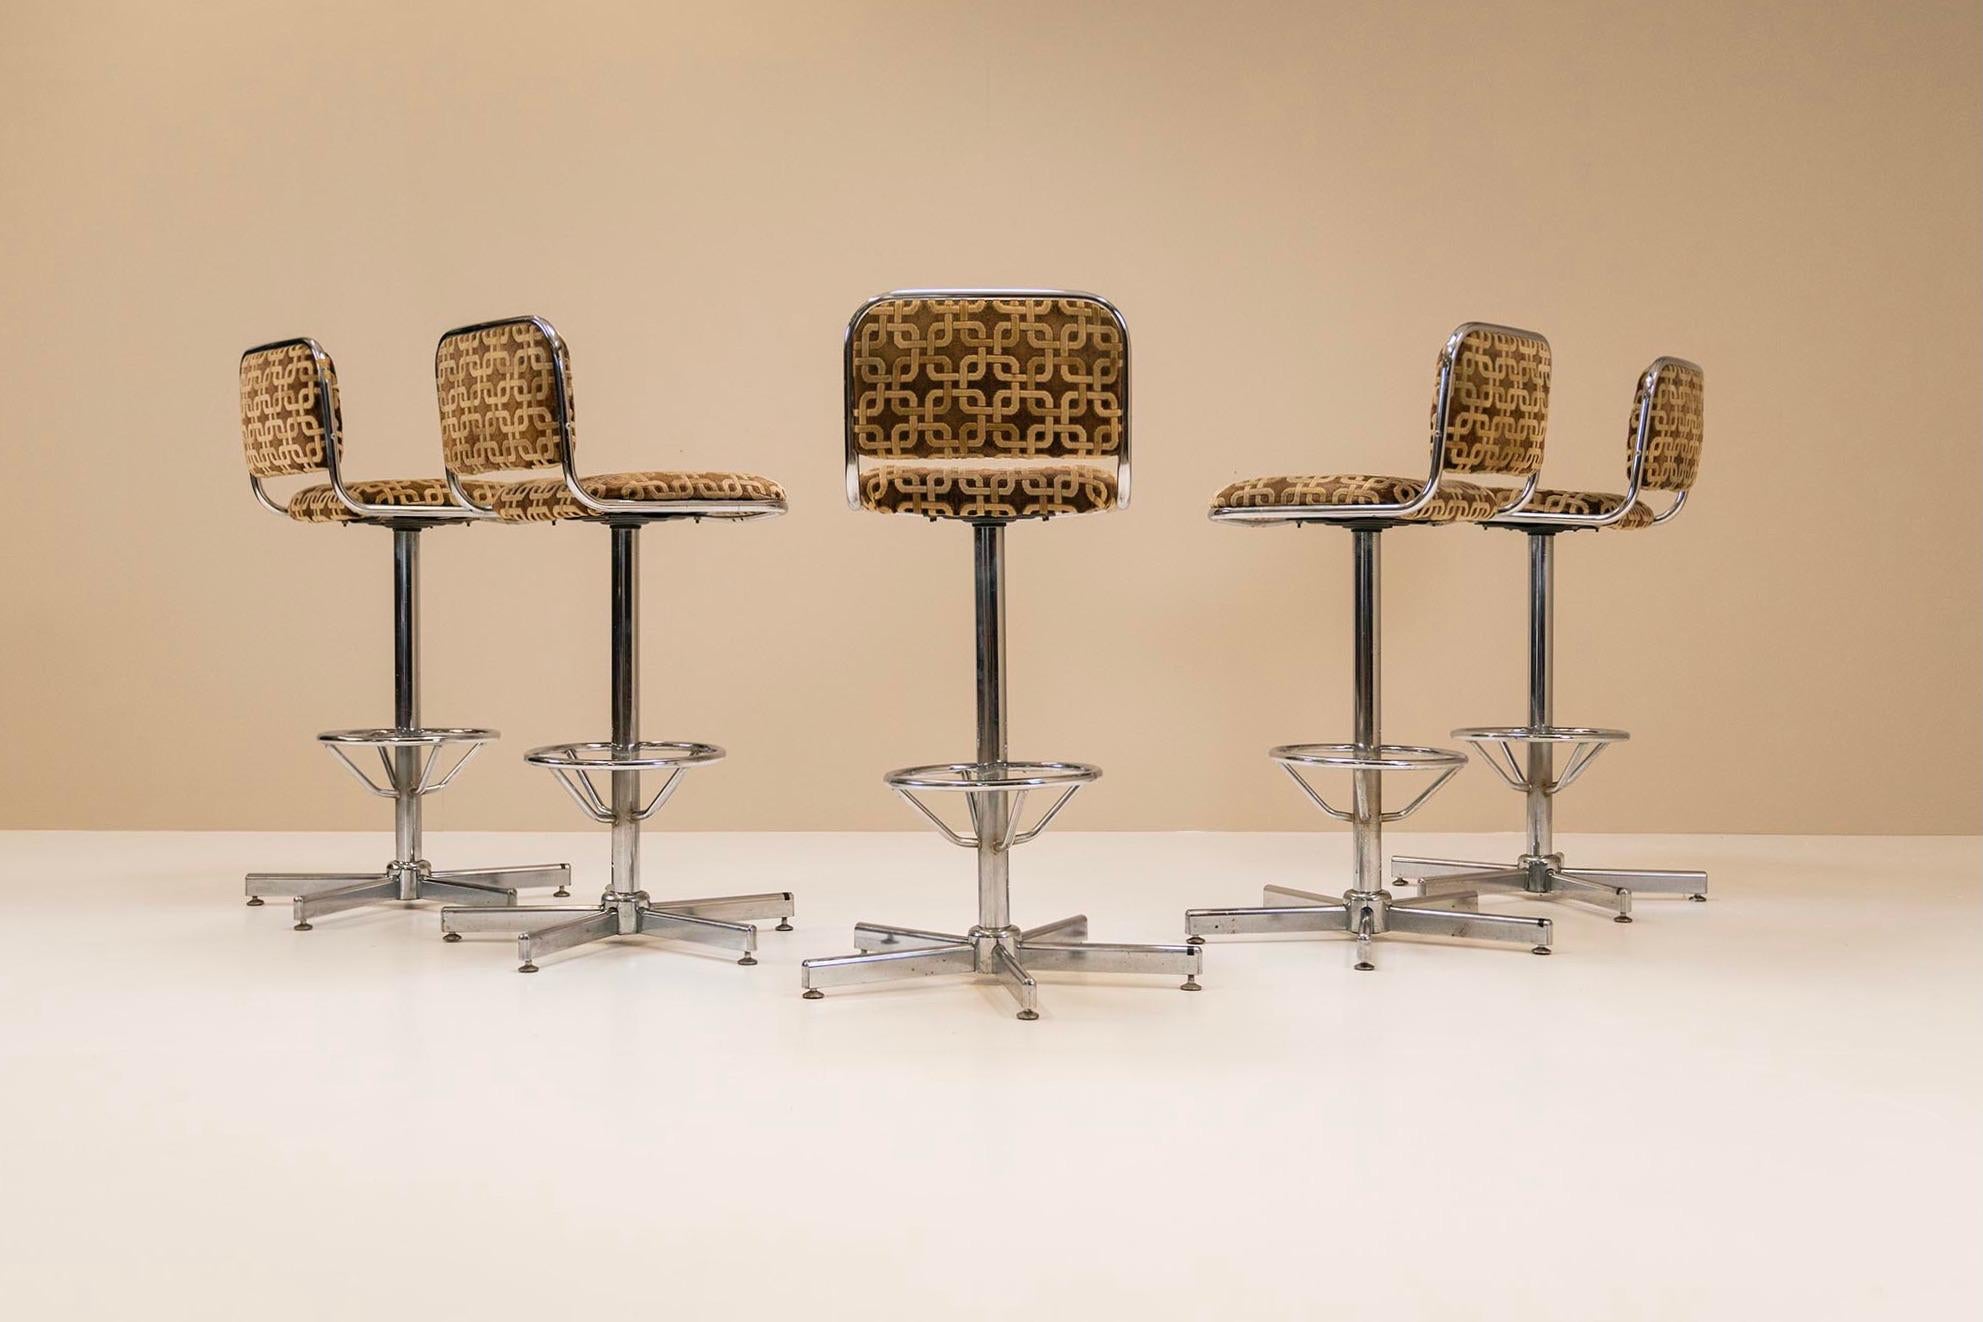 A very groovy set of five bar stools stemming from the 1970s from Italy. With their sturdy chrome-plated legs and special print, they are an absolute eye-catcher for your bar. The shifting pattern of the original upholstery goes from gray to light